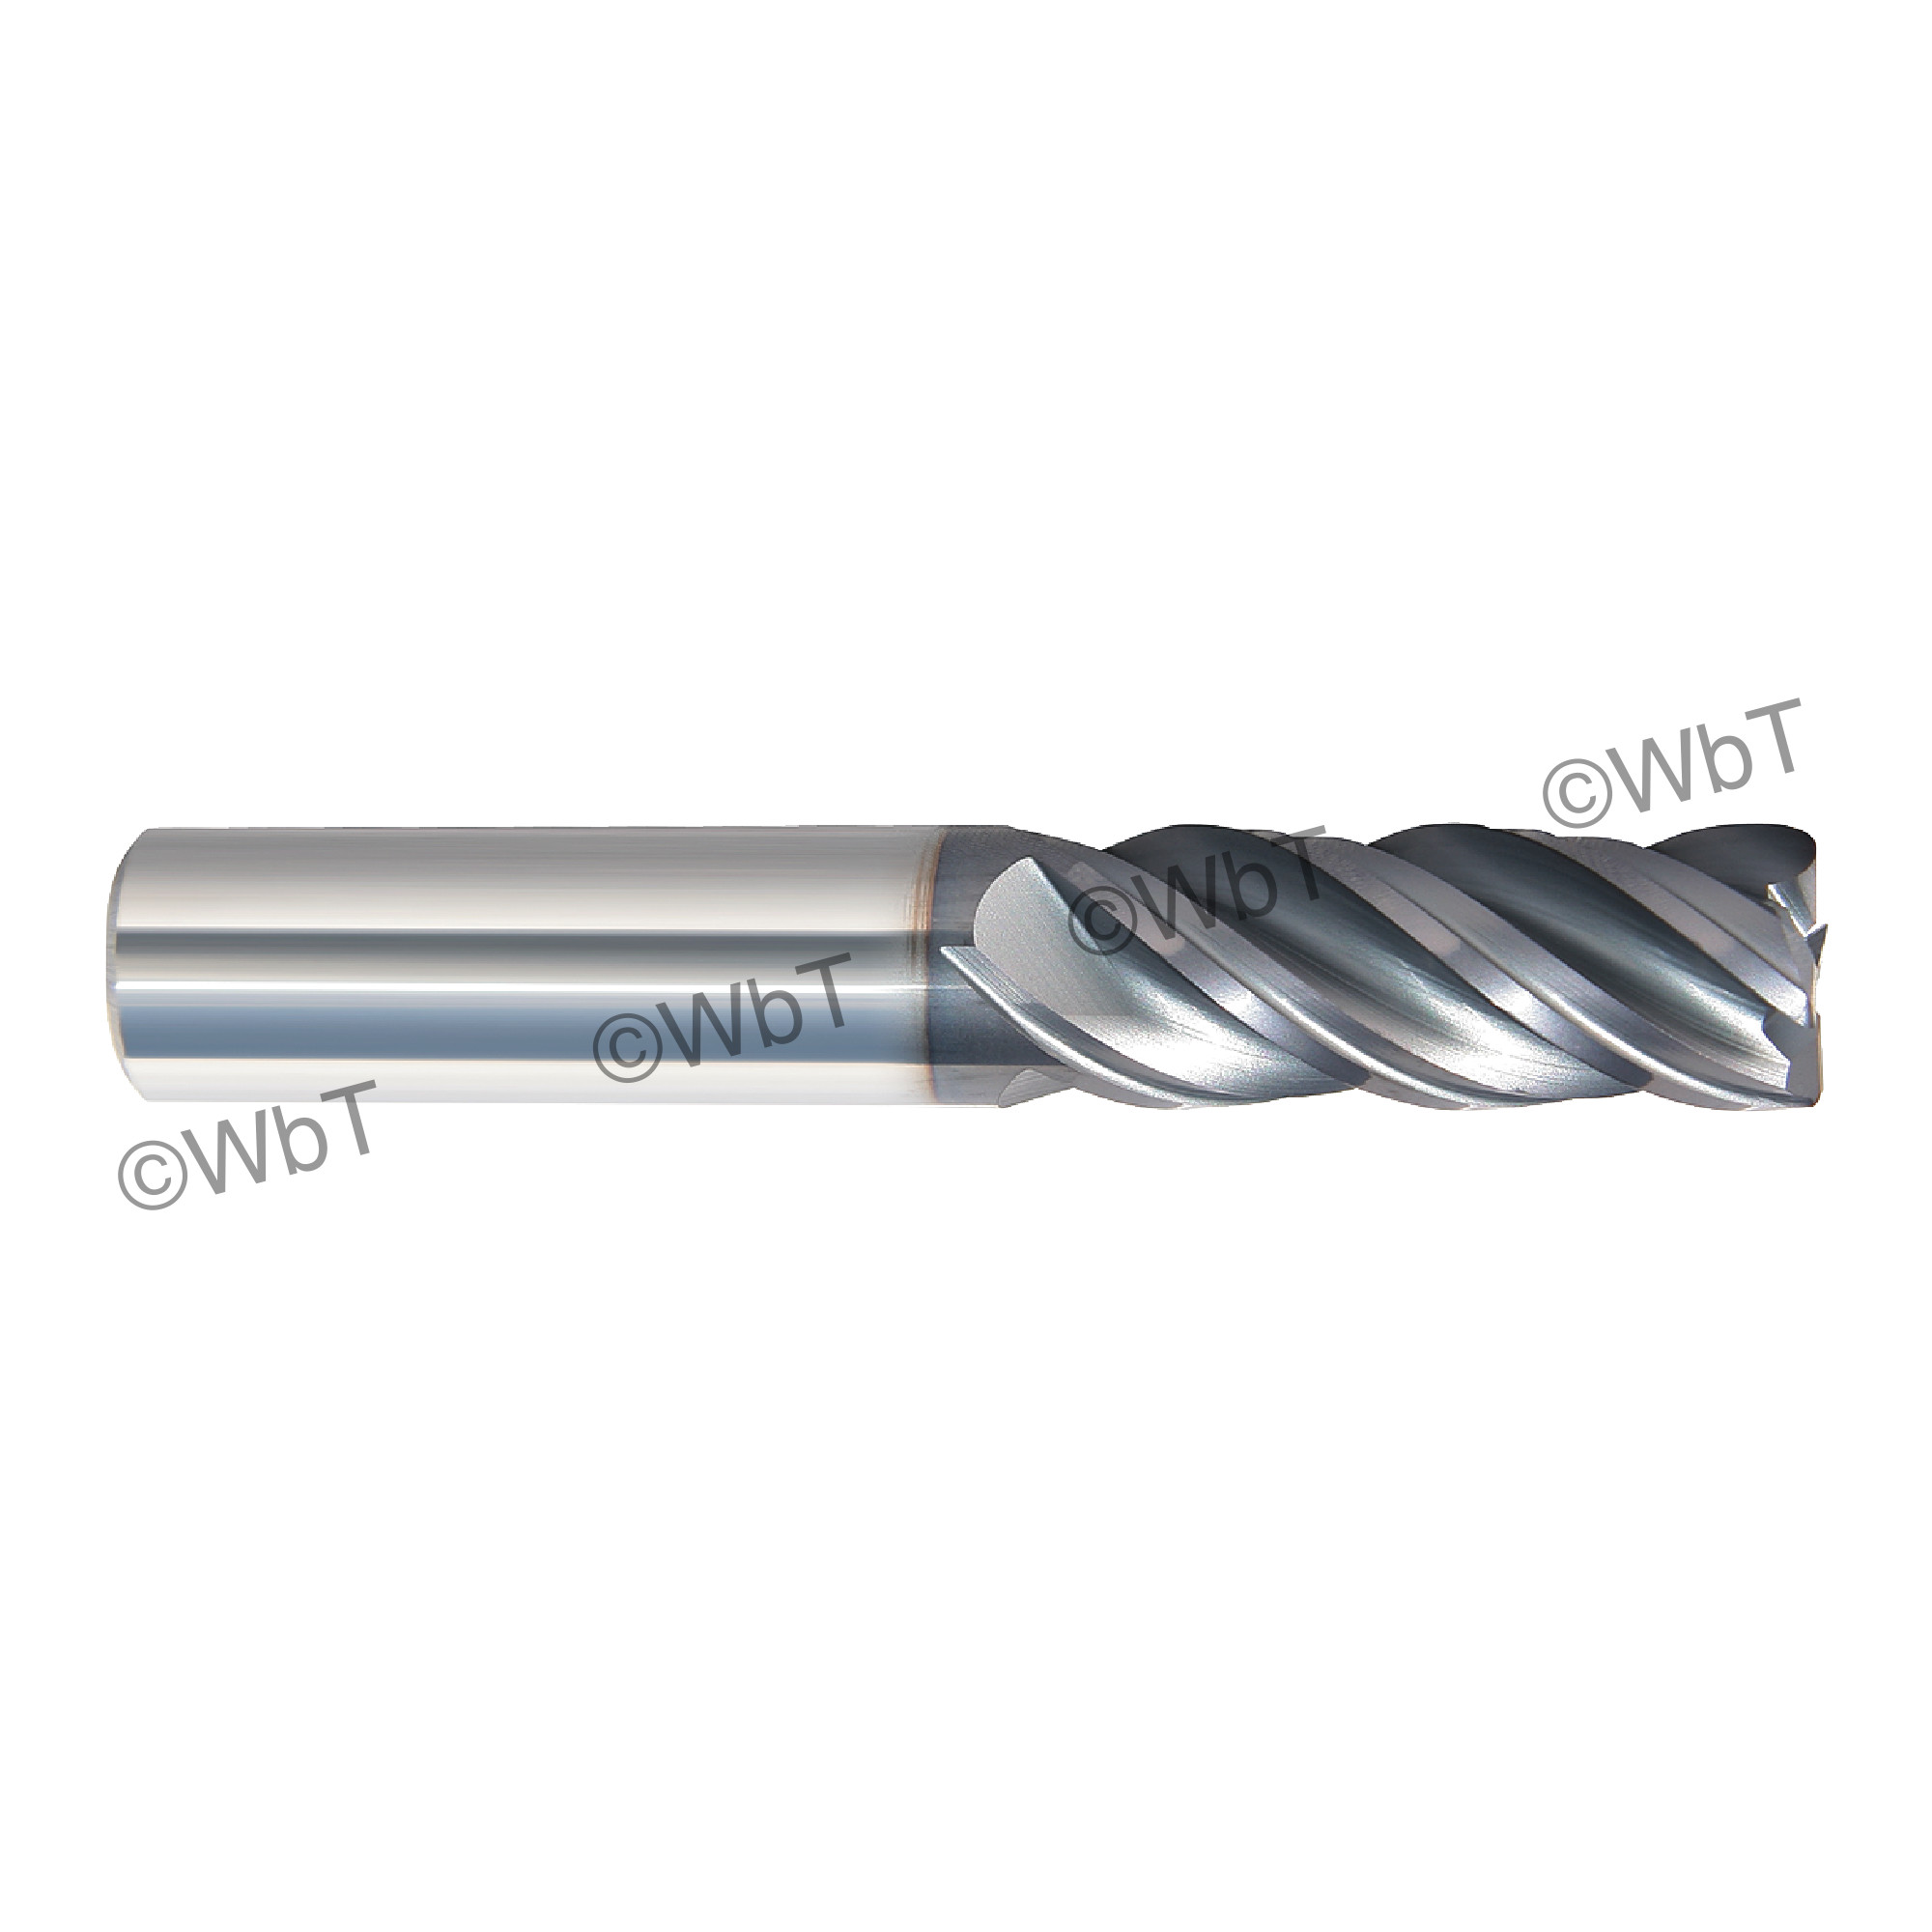 Rushmore USA 7/16" x 1" Flute Solid Carbide Variable Helix Unequal Index AlTiN Coated Corner Radius 4 Flute Roughing & F